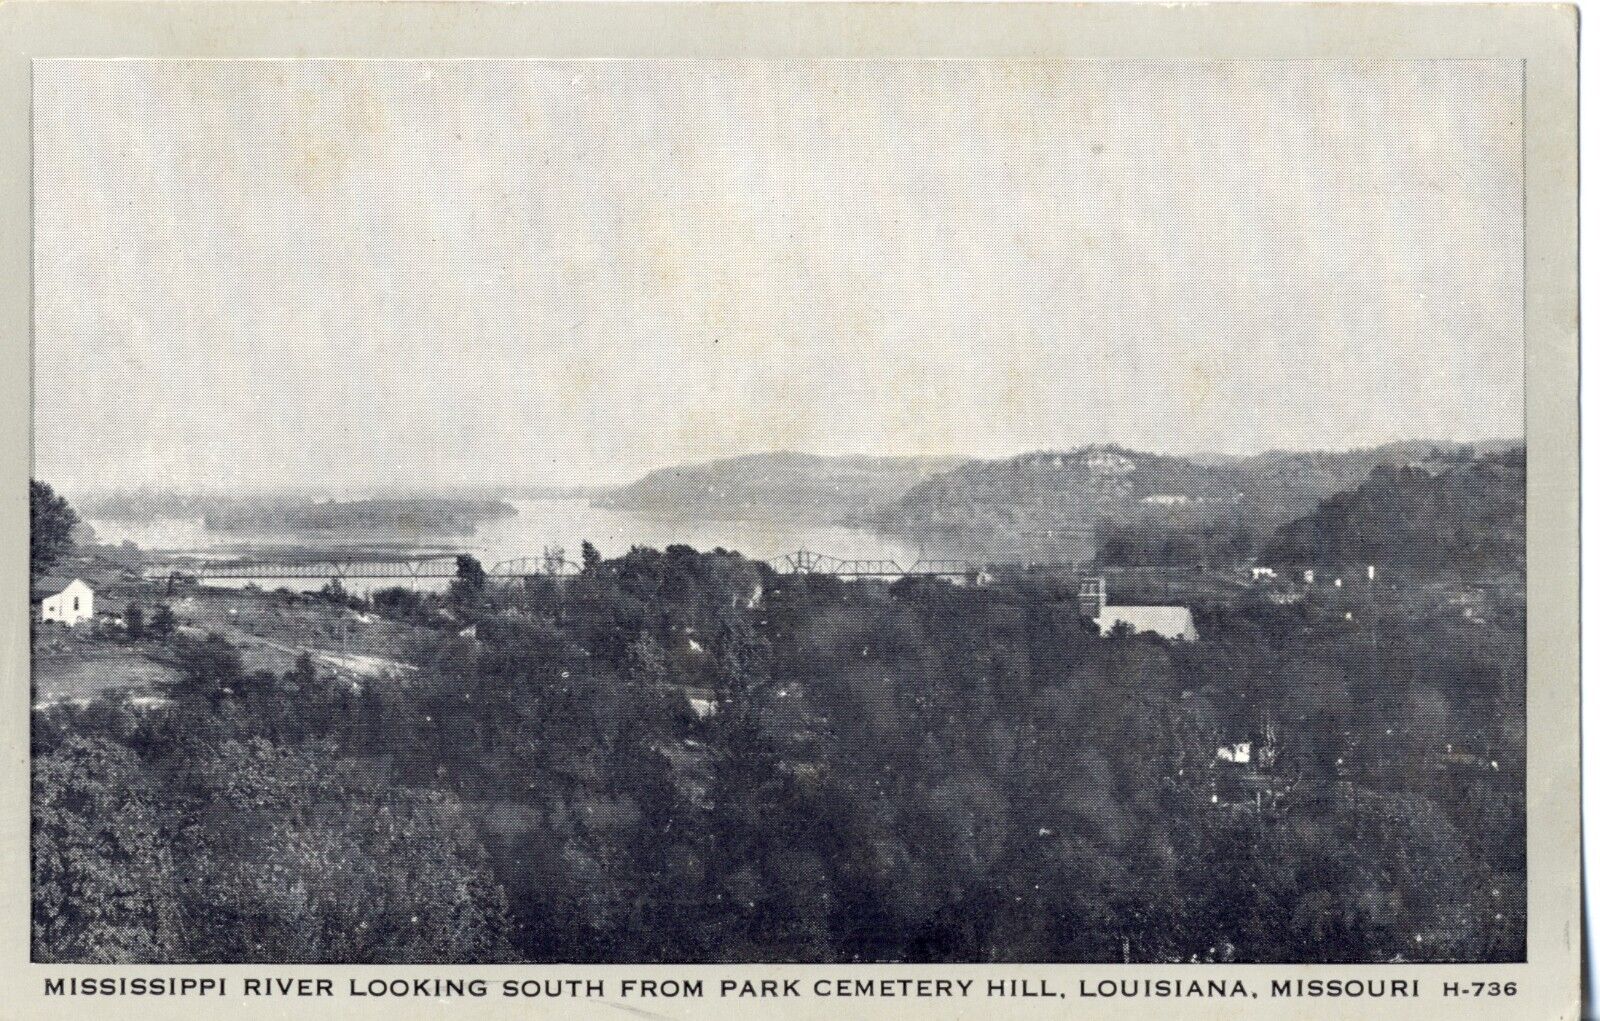 Mississippi River Looking South From Park Cemetery, Louisiana, Mo. Missouri Card